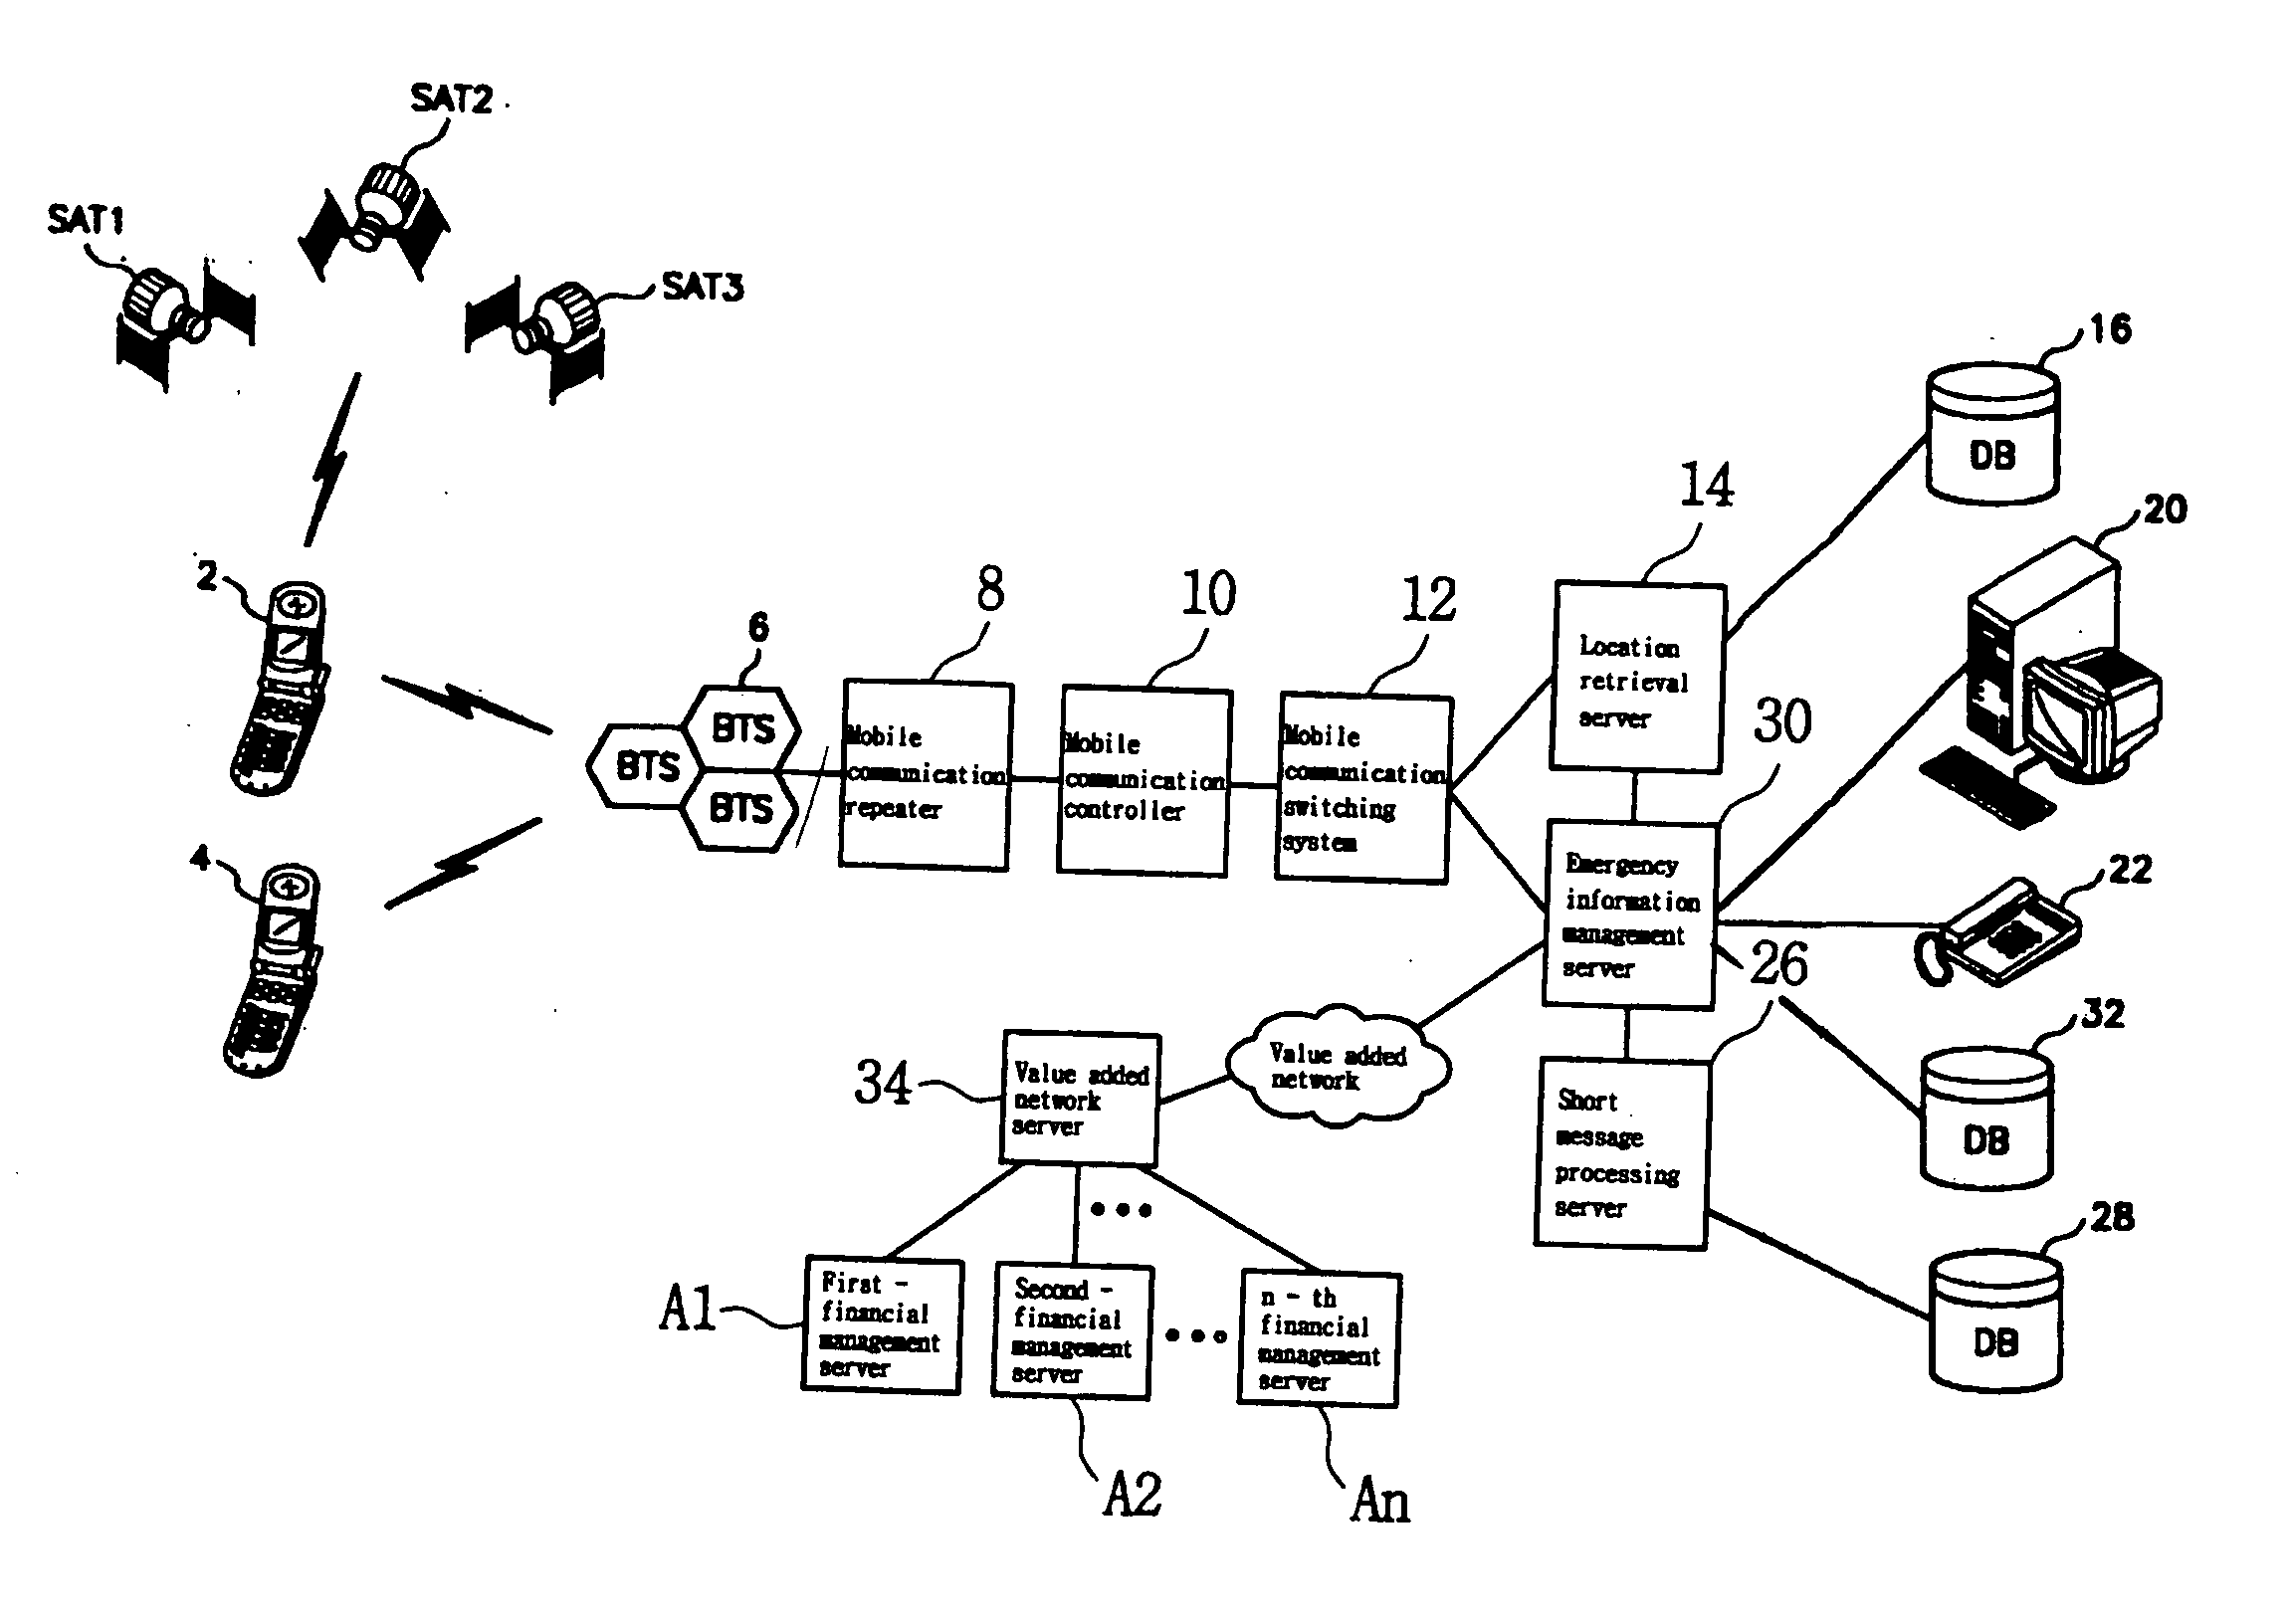 Location information of emergency call providing system using mobile network